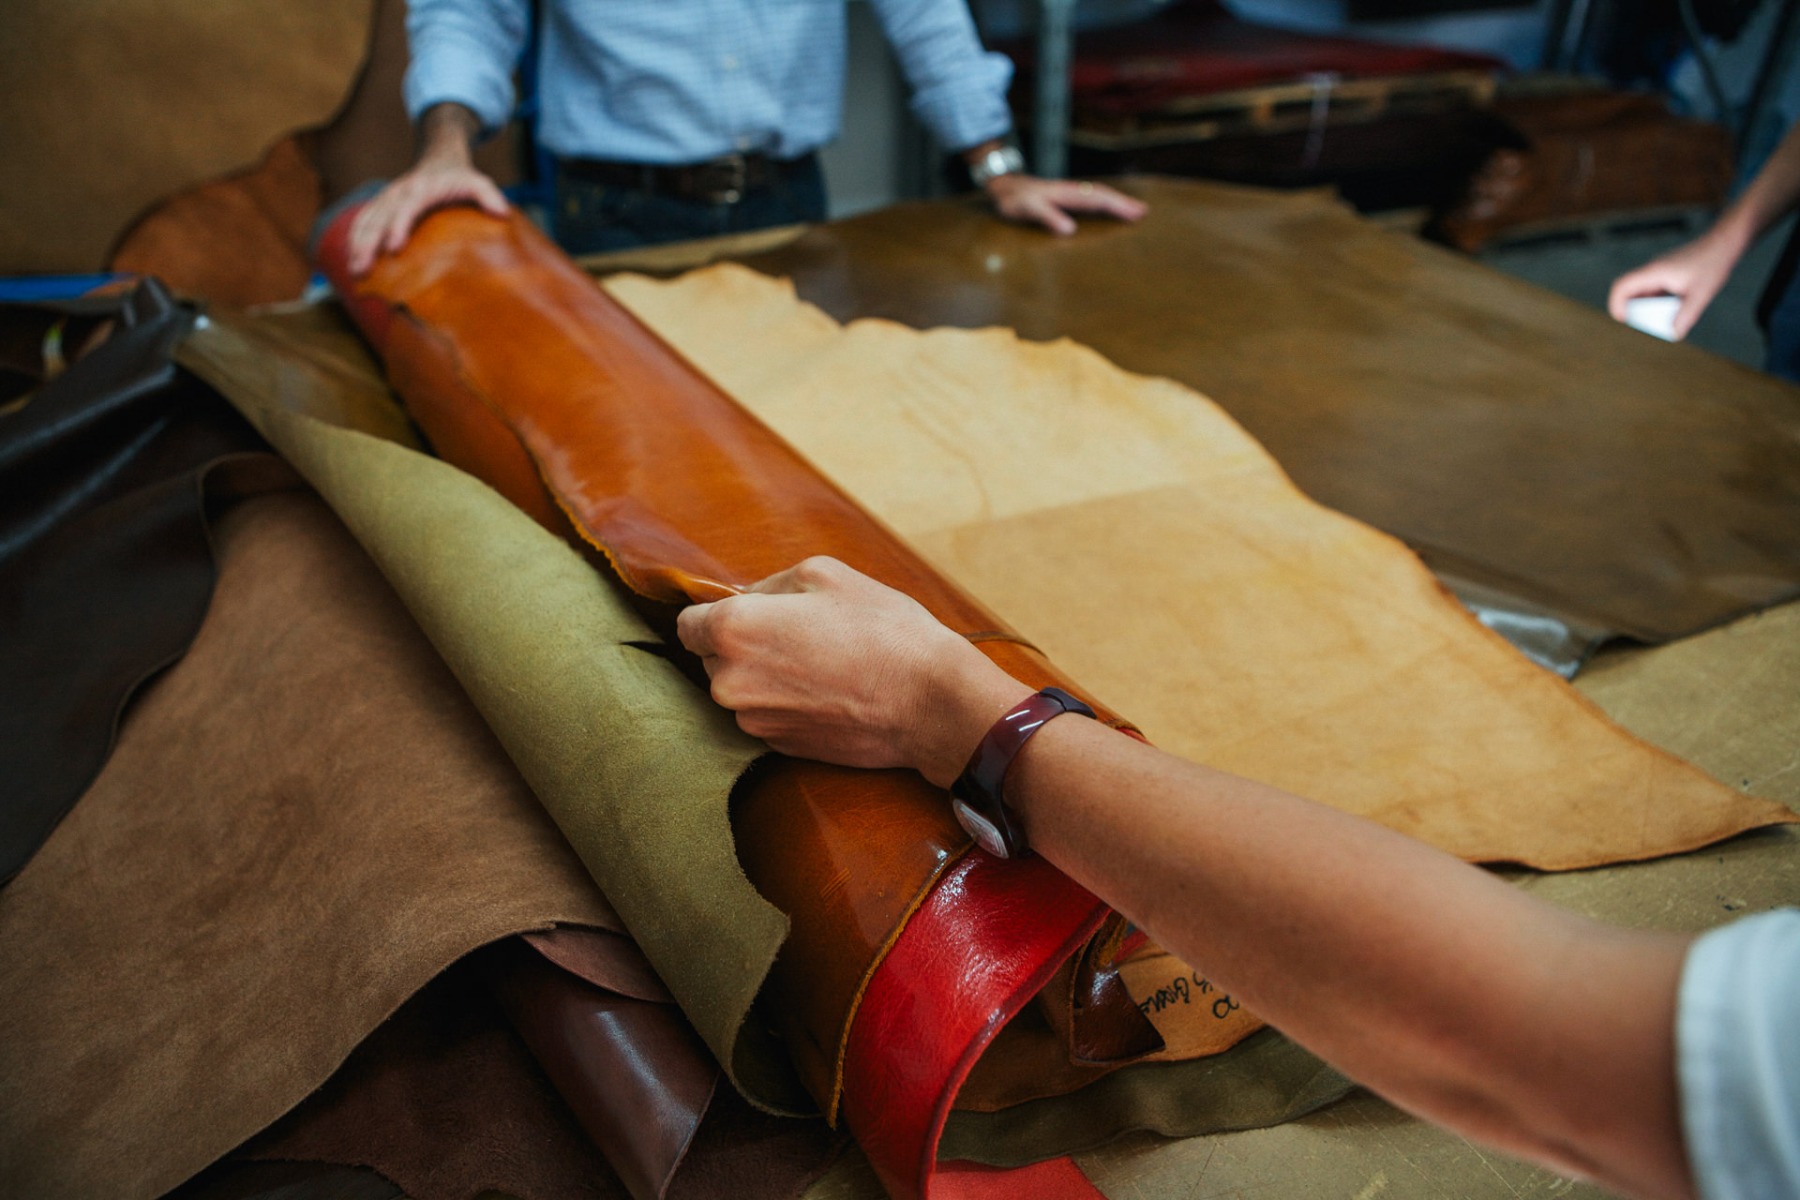 Evaluating experimental leathers at one of our production facilities in Tuscany